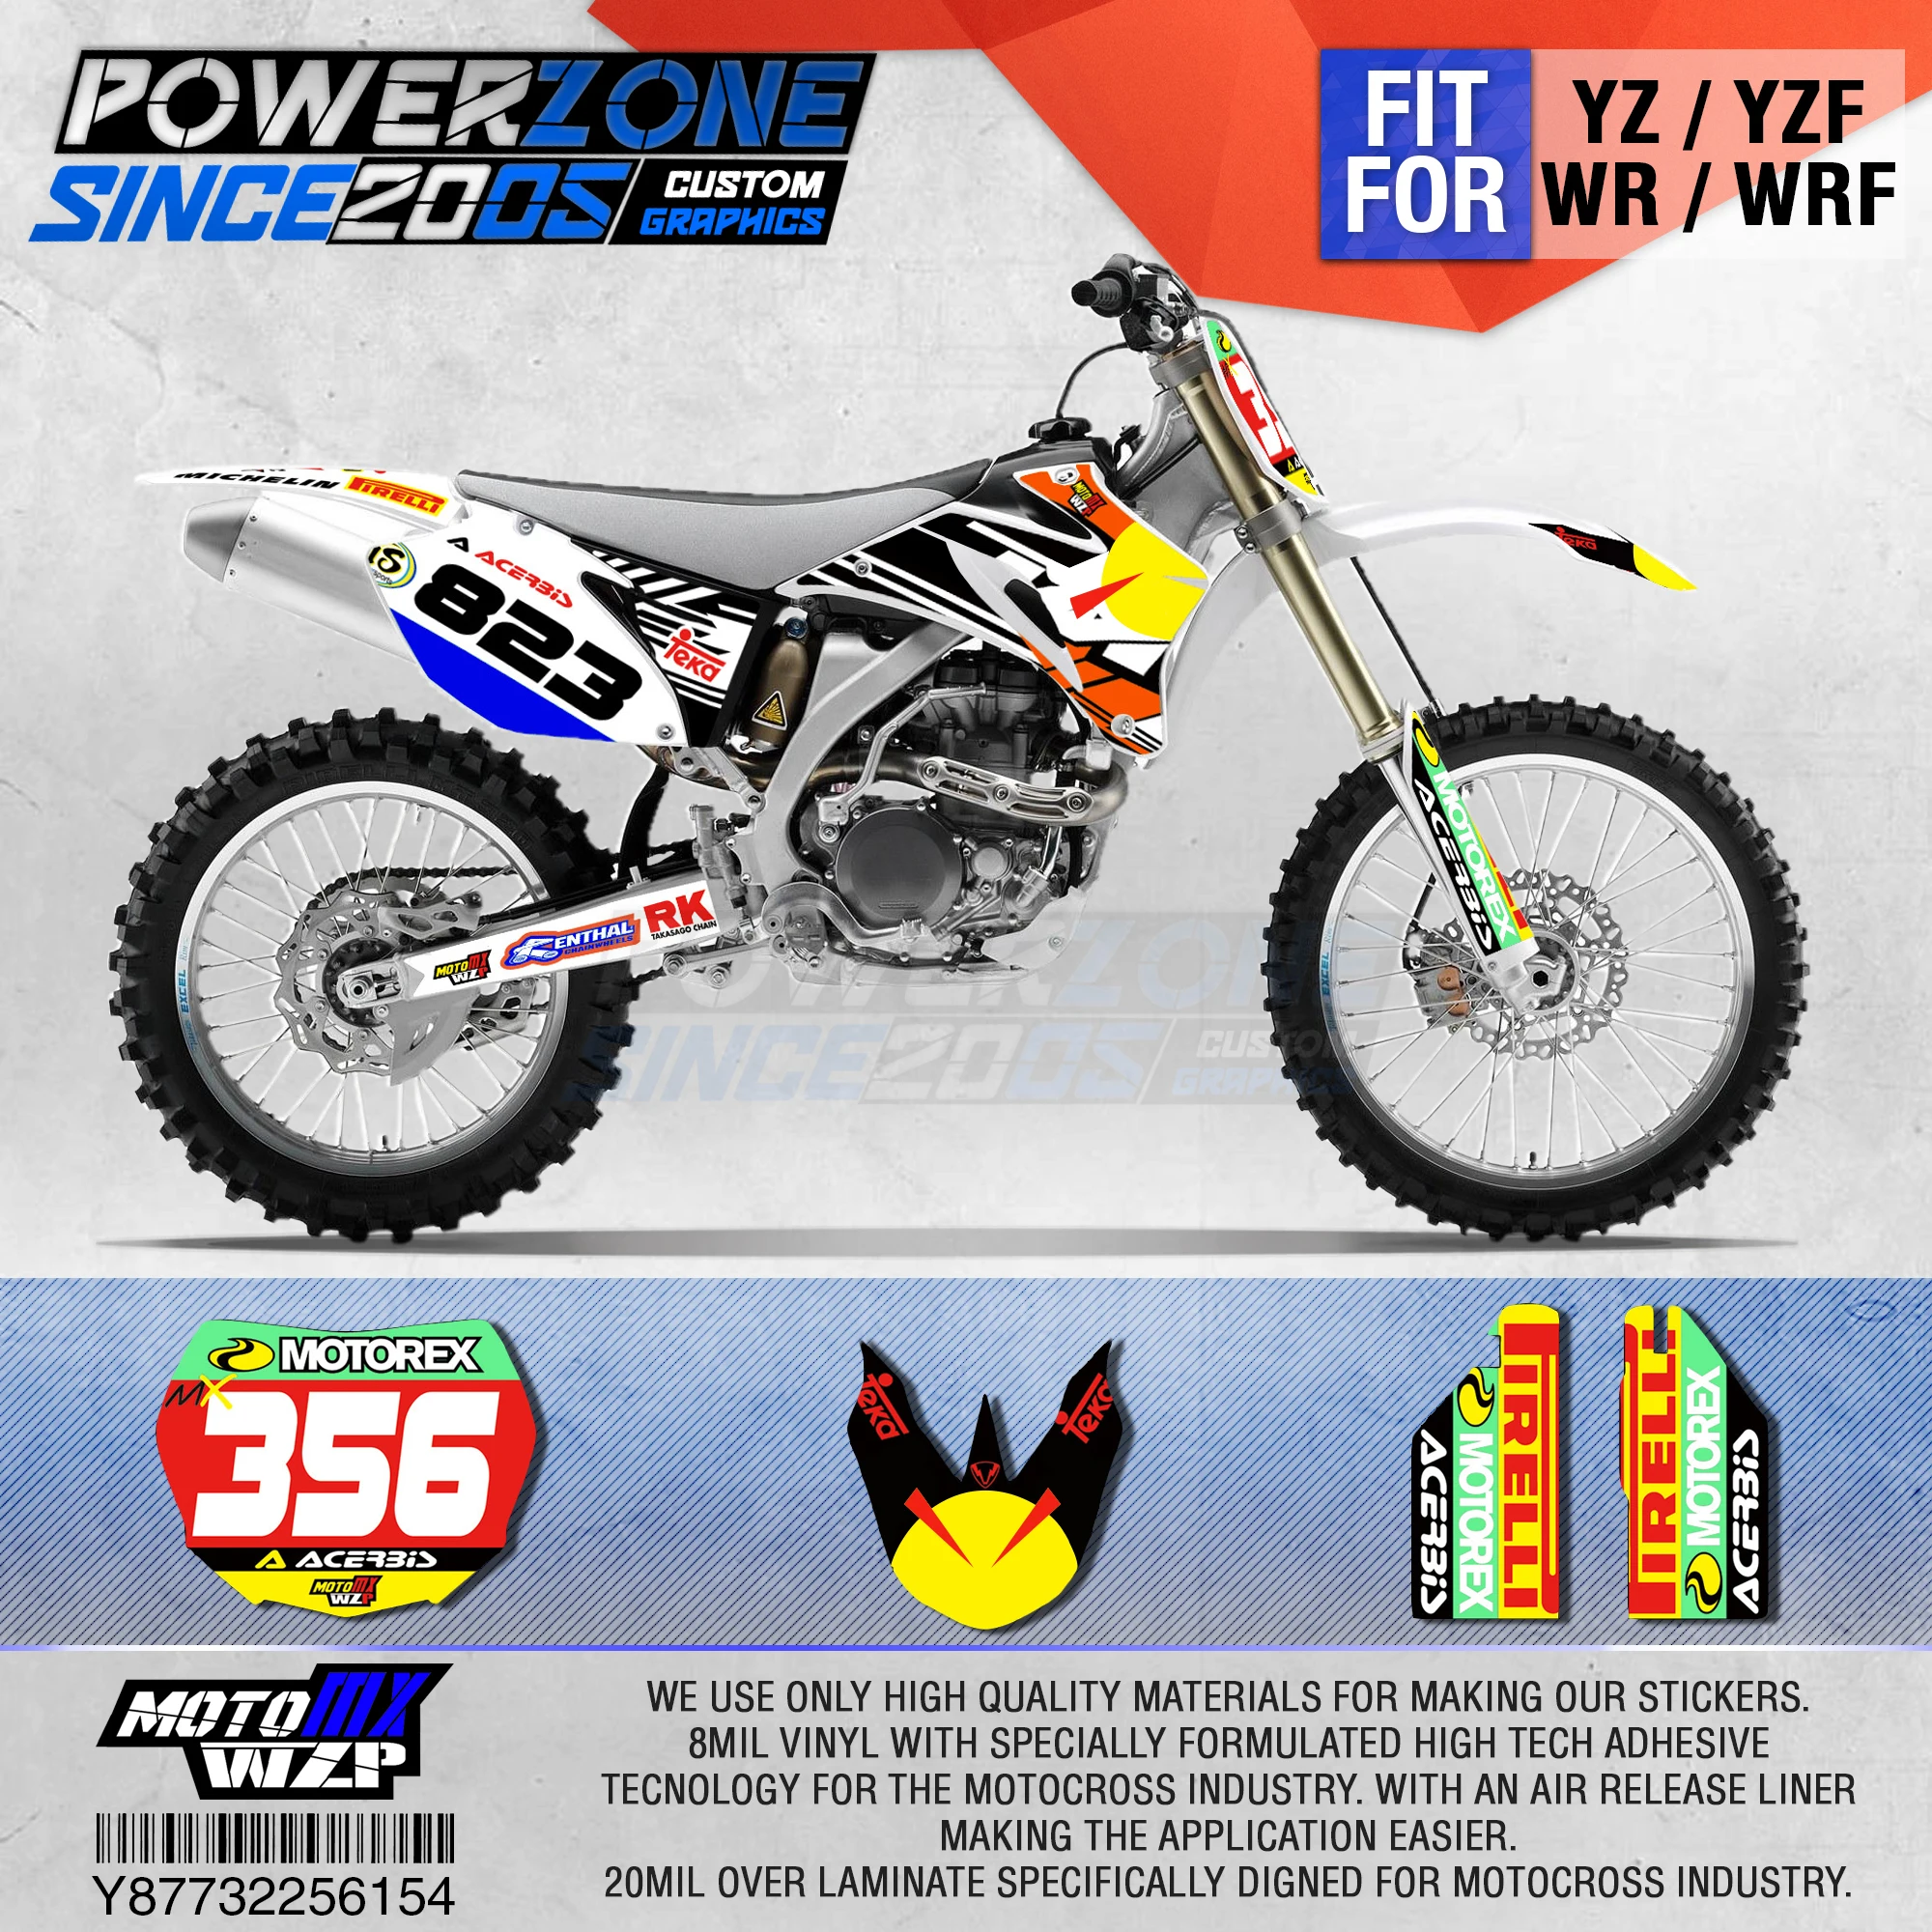 

PowerZone Customized Team Graphics Backgrounds Decals 3M Custom Stickers For YAMAHA YZF250 450 06-09 WR250F/450F 07-13 07-11 154